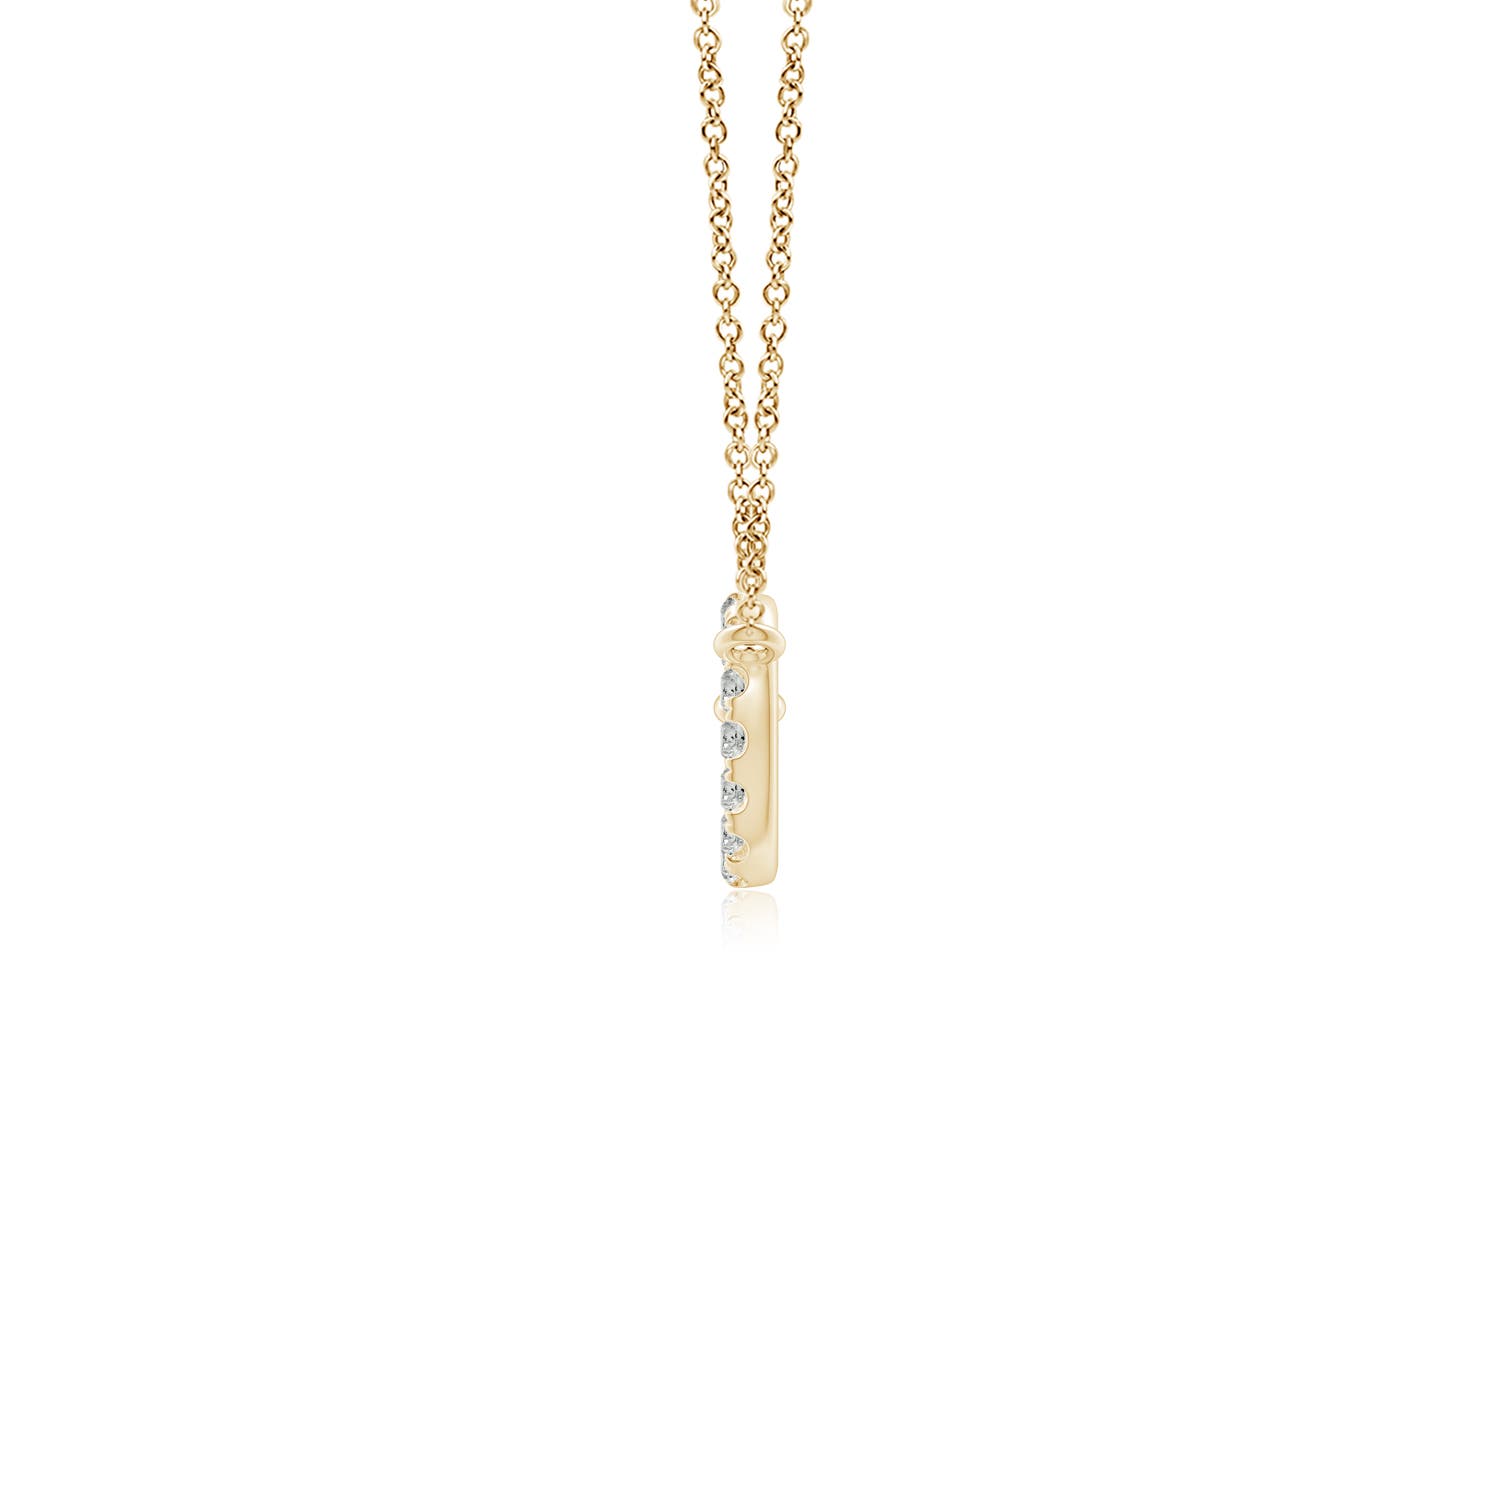 K, I3 / 0.34 CT / 14 KT Yellow Gold